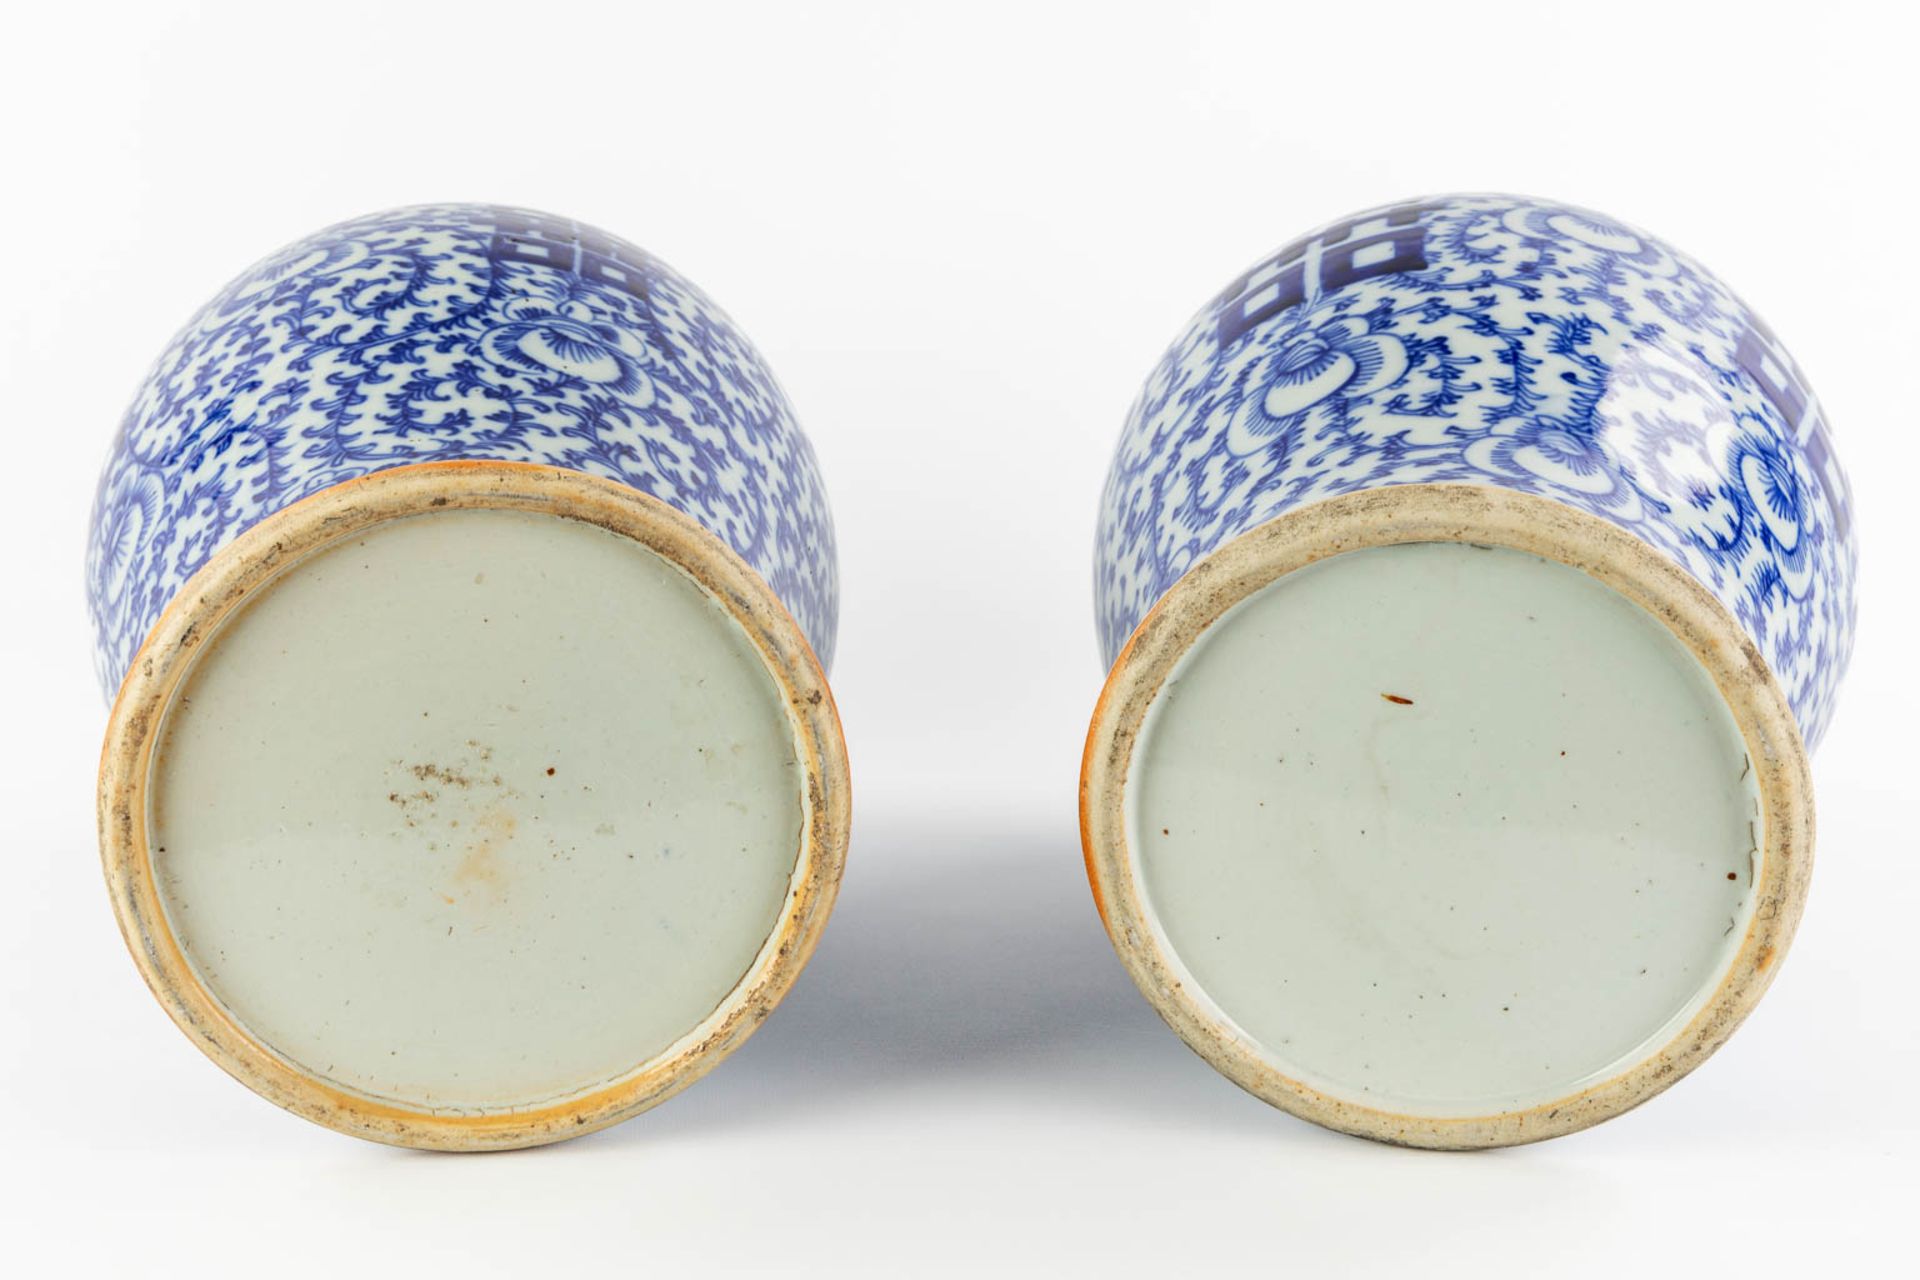 A pair of Chinese vases with a blue-white decor and a Double Xi-sign. 19th/20th C. (H:41 x D:26 cm) - Image 6 of 8